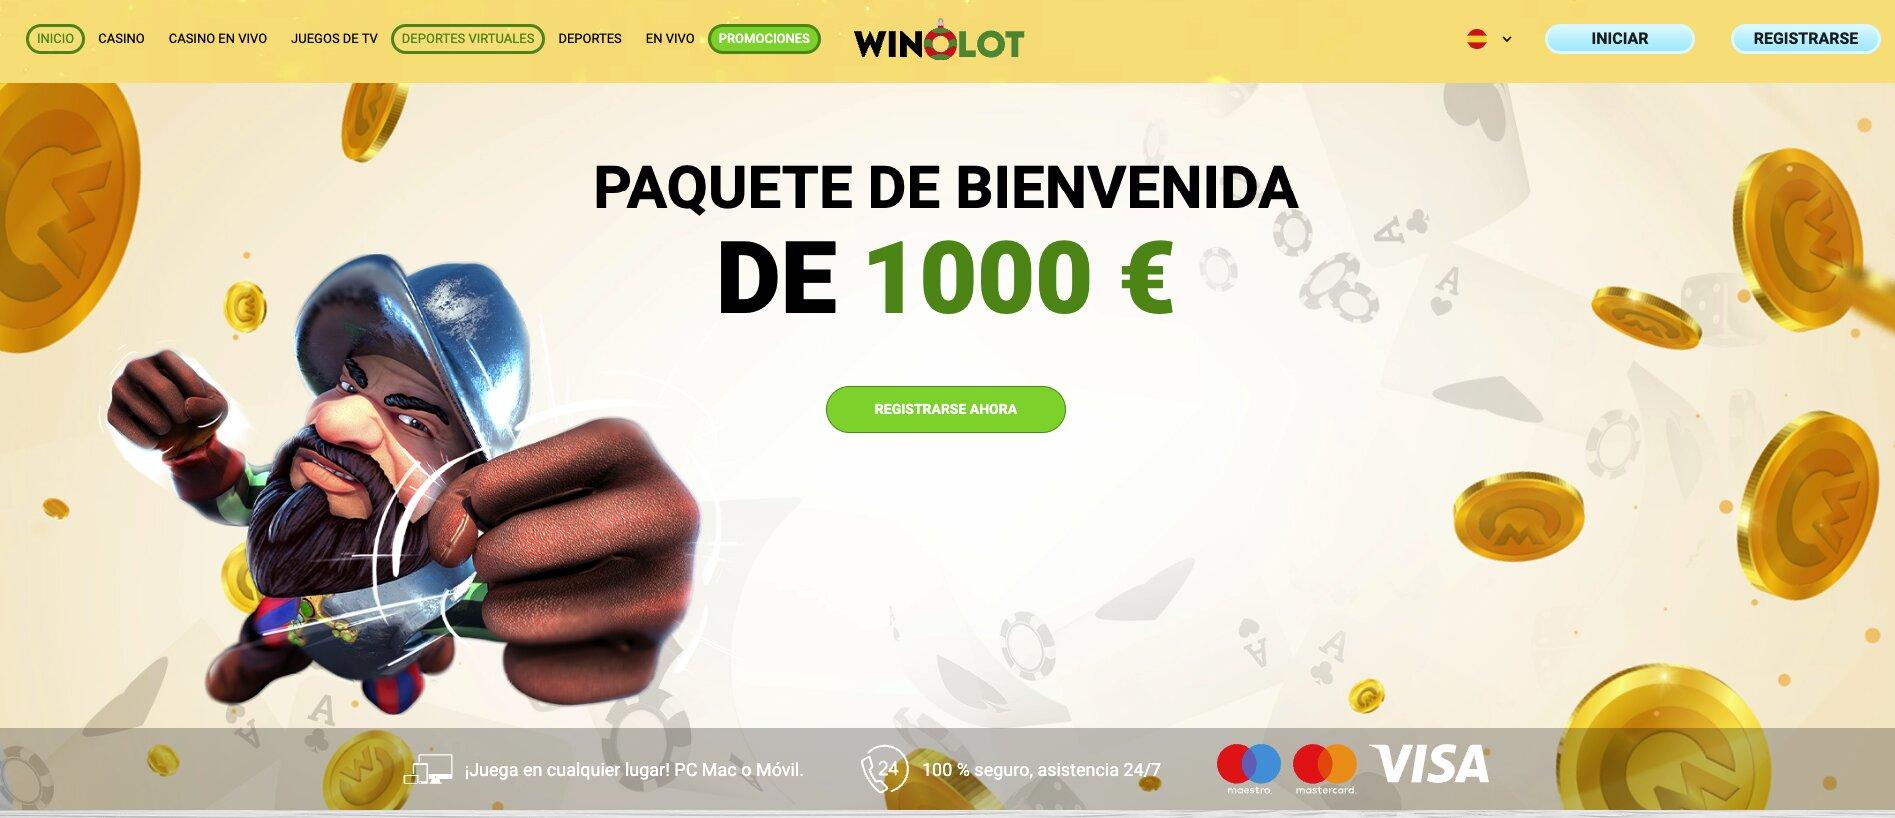 How to start With casino online sin licencia in 2021